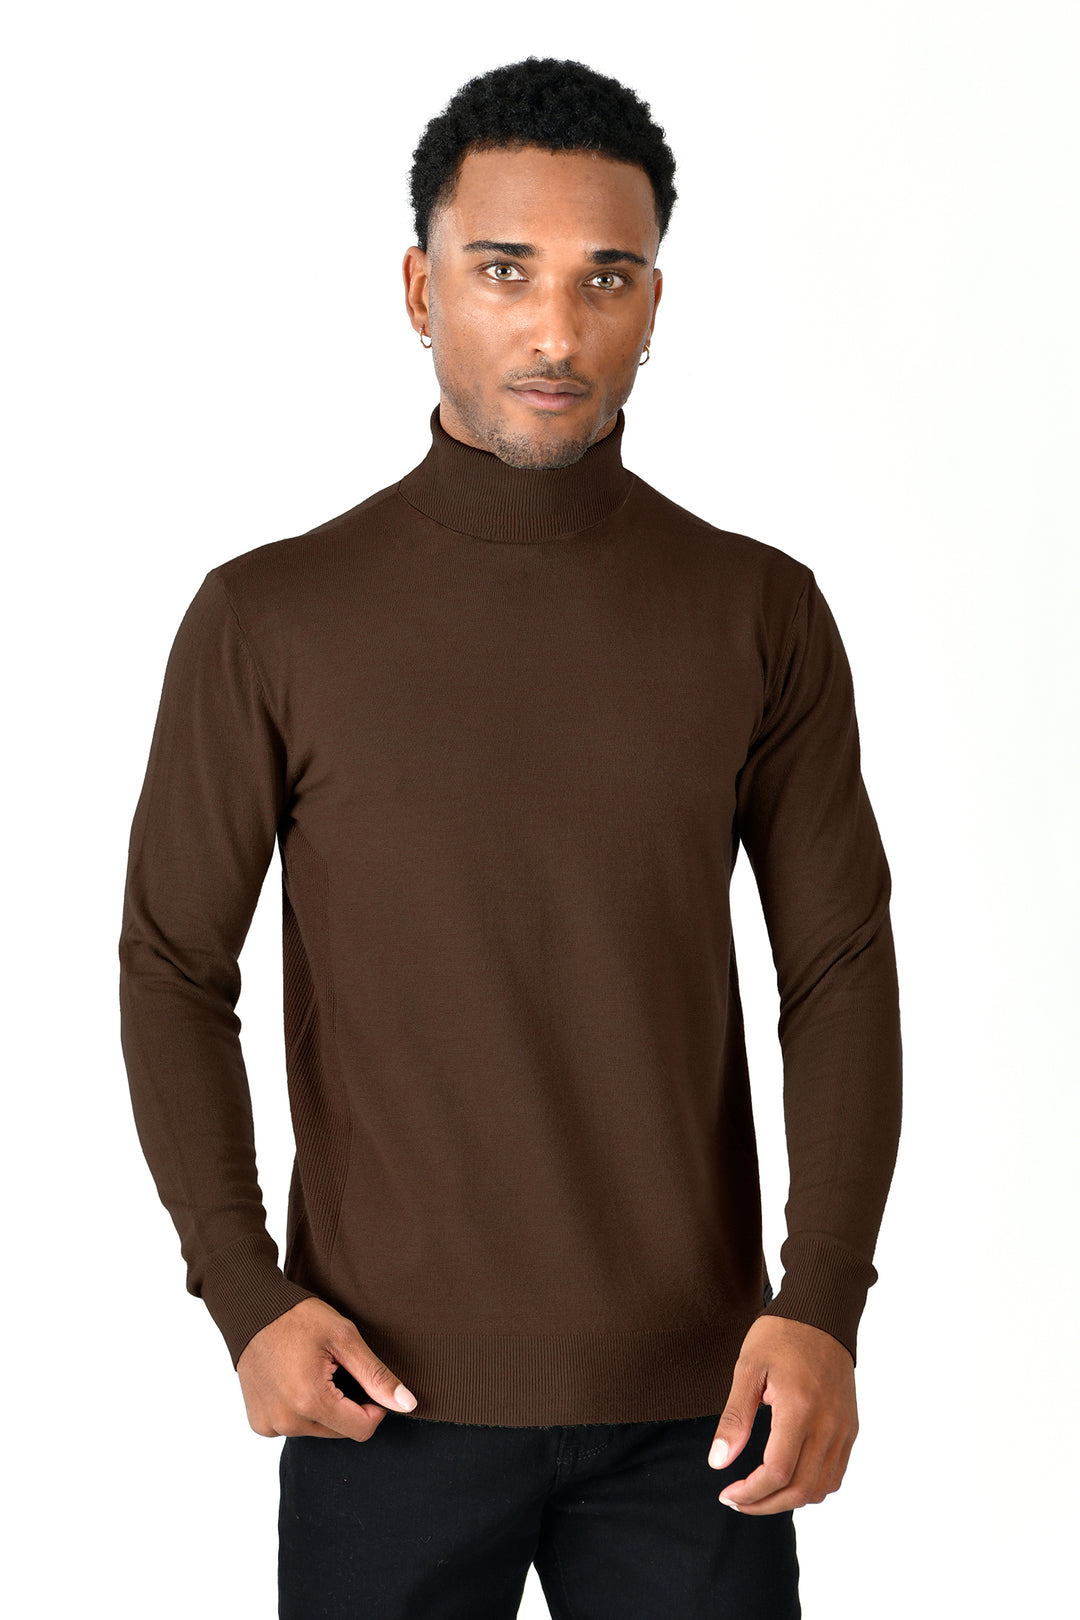 Men's Turtleneck Ribbed Solid Color Basic Sweater LS2100 Chocolate